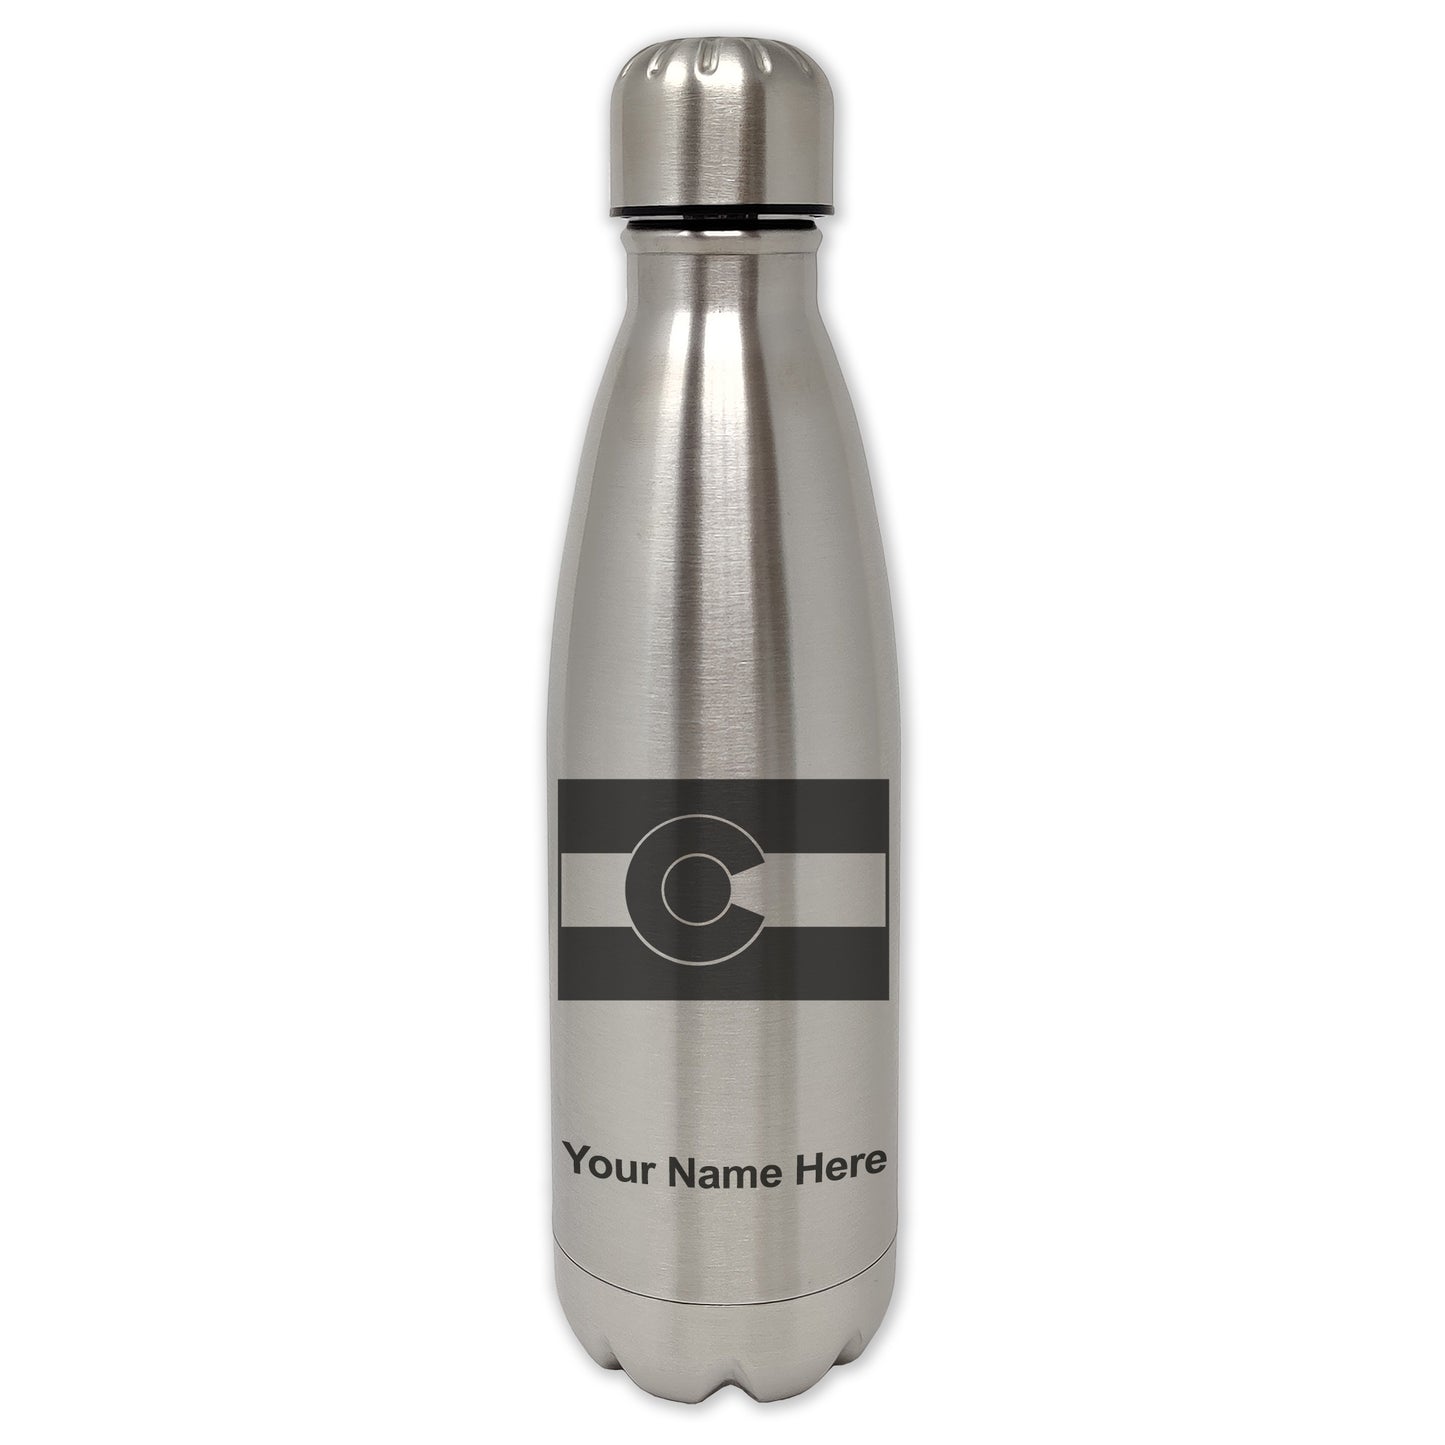 LaserGram Single Wall Water Bottle, Flag of Colorado, Personalized Engraving Included